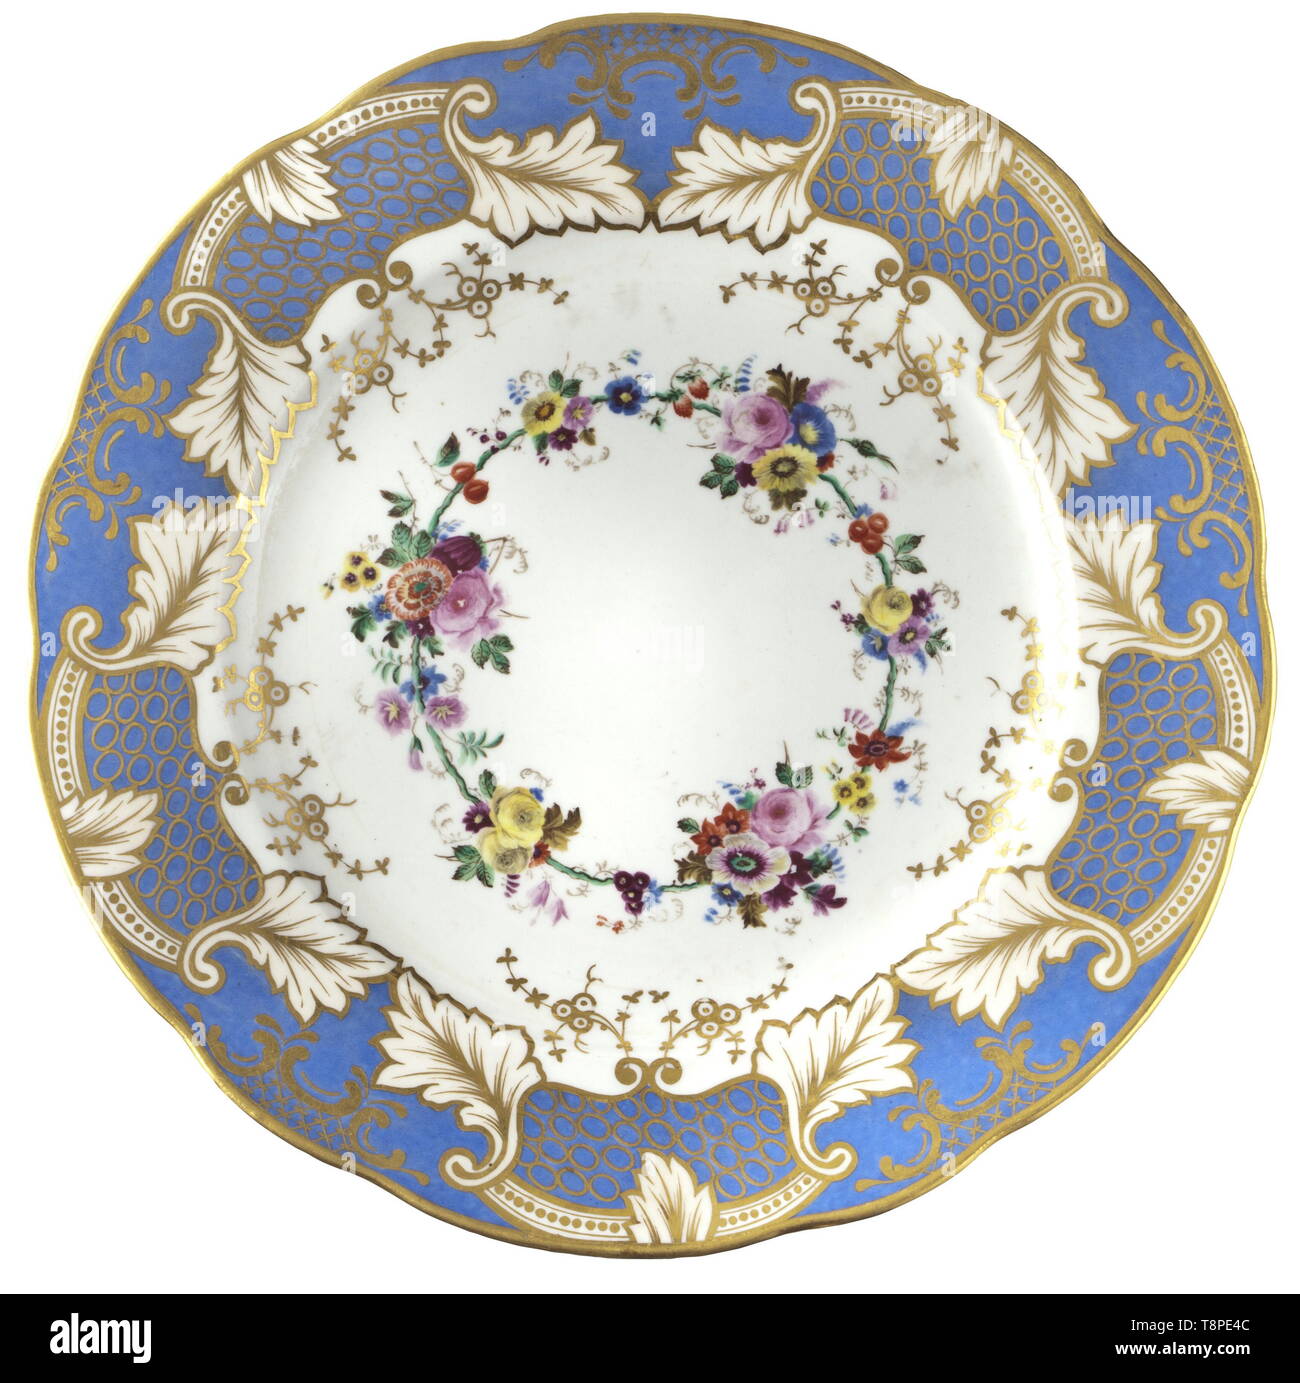 A plate from the table service of Grand Duchess Olga Nikolaevna Romanova, Imperial Russian Porcelain Manufactory St. Petersburg, circa 1840 White, glazed porcelain, the light blue border with golden cartouches and foliage decoration, the centre decorated with hand-painted flowers. On the bottom the steel-blue underglaze mark 'N I' of the Imperial Manufactory St. Petersburg. Diameter 25 cm. The service was a gift of her father, Tsar Nicholas I, and part of her dowry. Of excellent preservation and workmanship. Provenance: Grand Duchess Olga Nikolae, Additional-Rights-Clearance-Info-Not-Available Stock Photo